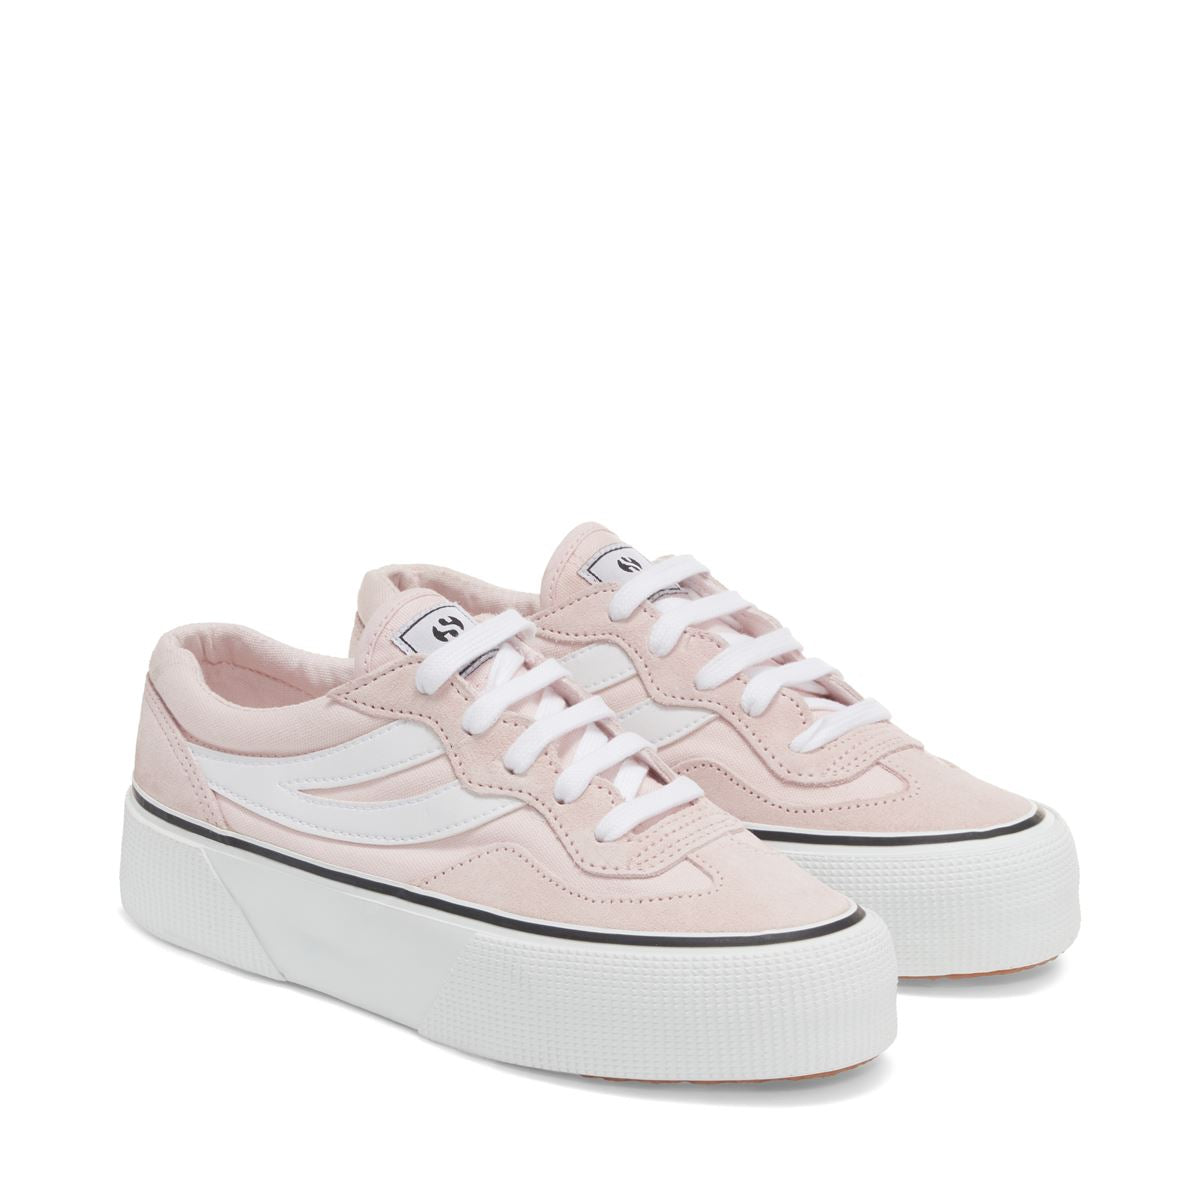 3041 REVOLLEY COLORBLOCK PLATFORM A5X-Pink Ish-White- Hover Image